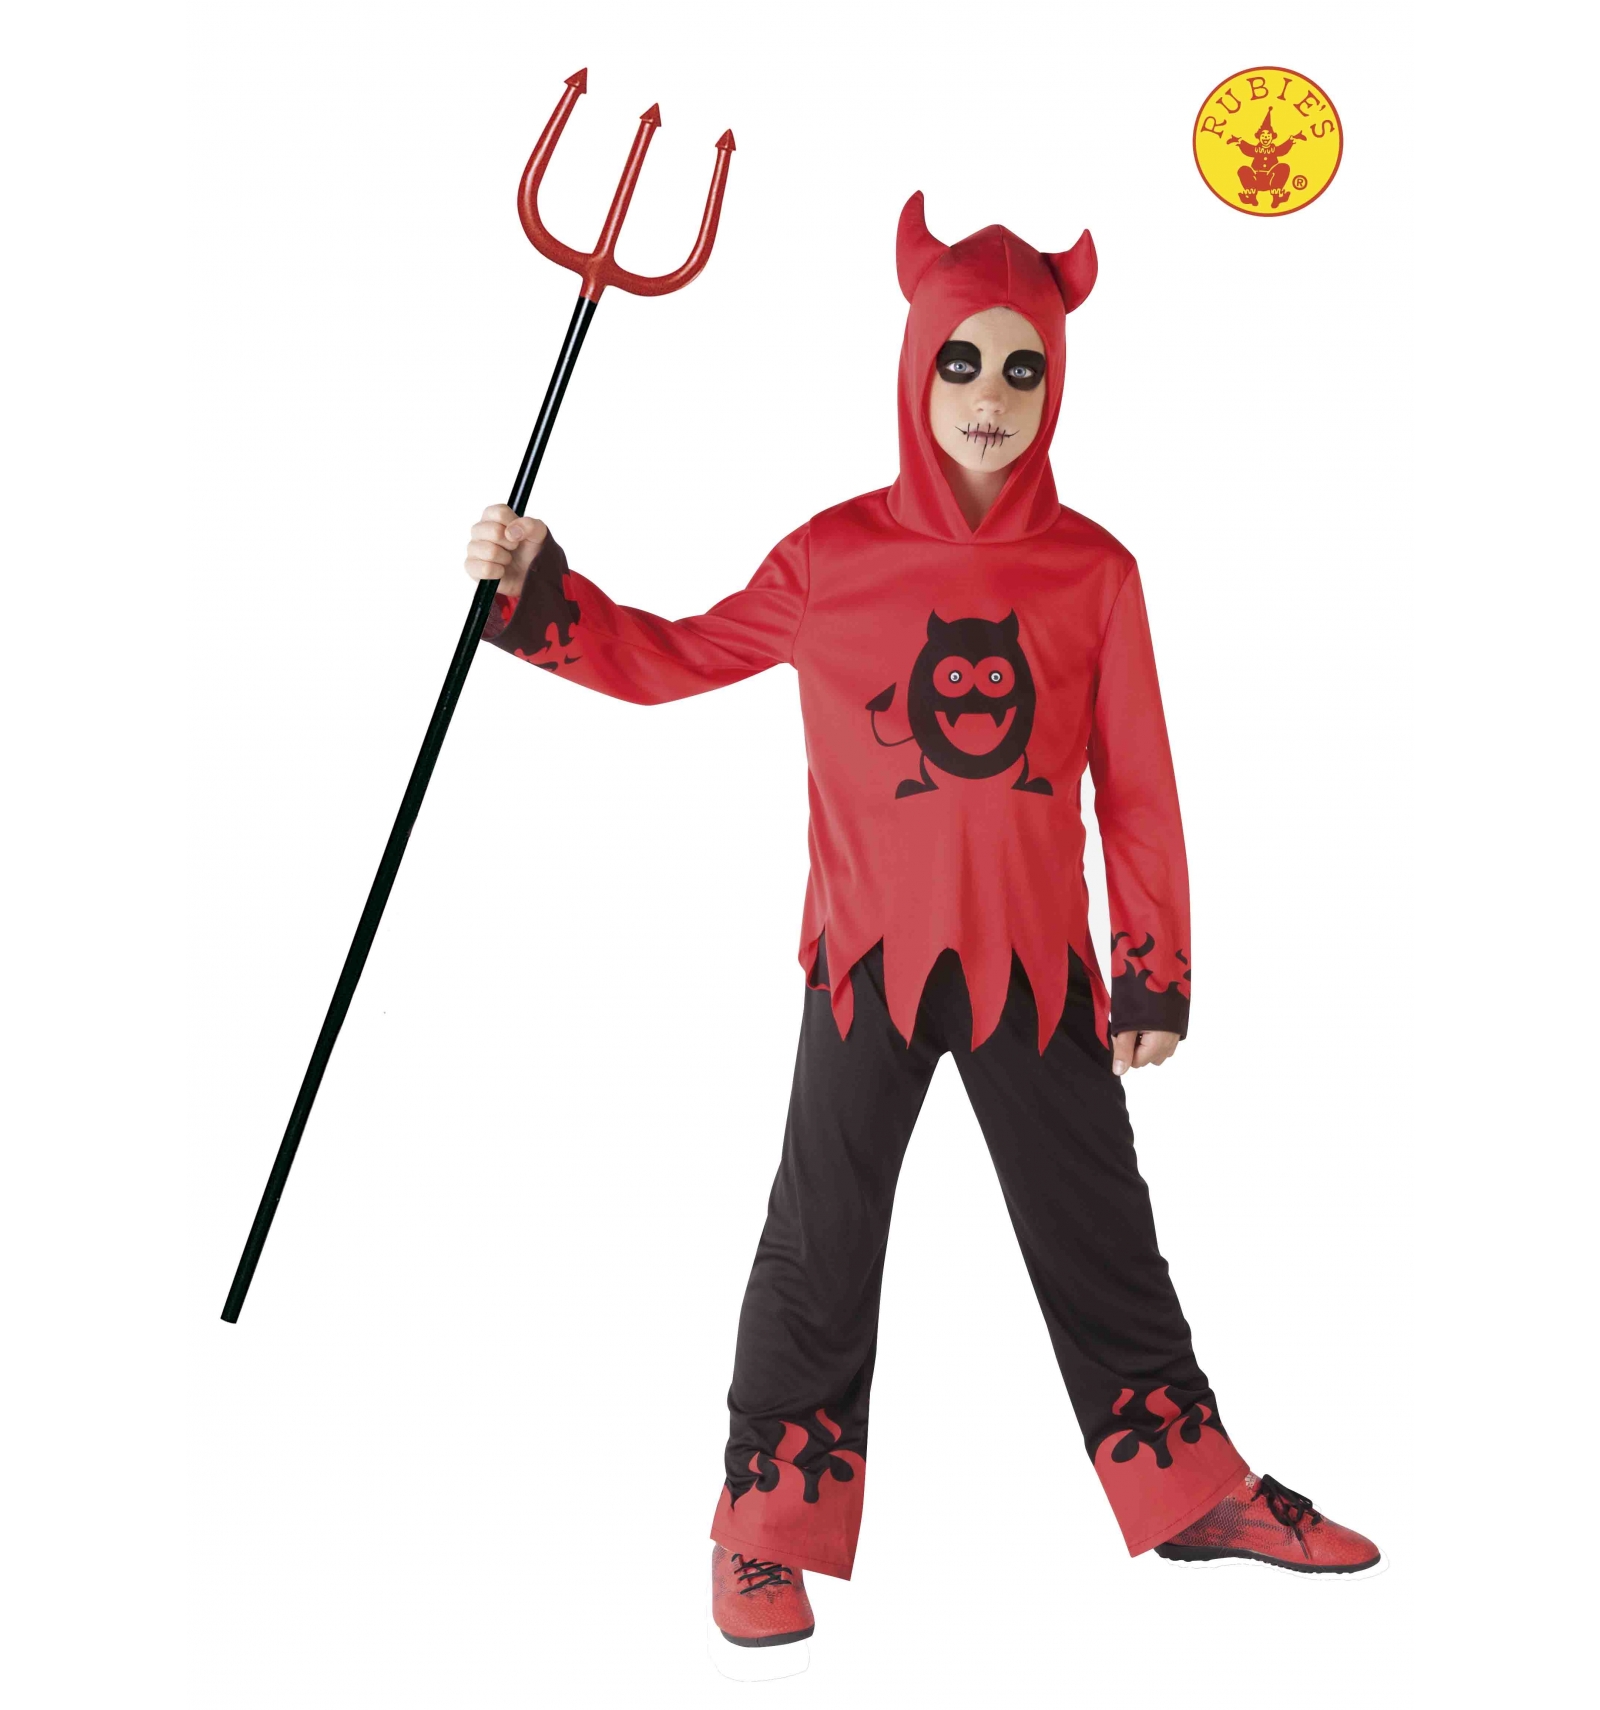 Imp costume with movable eyes - Your Online Costume Store